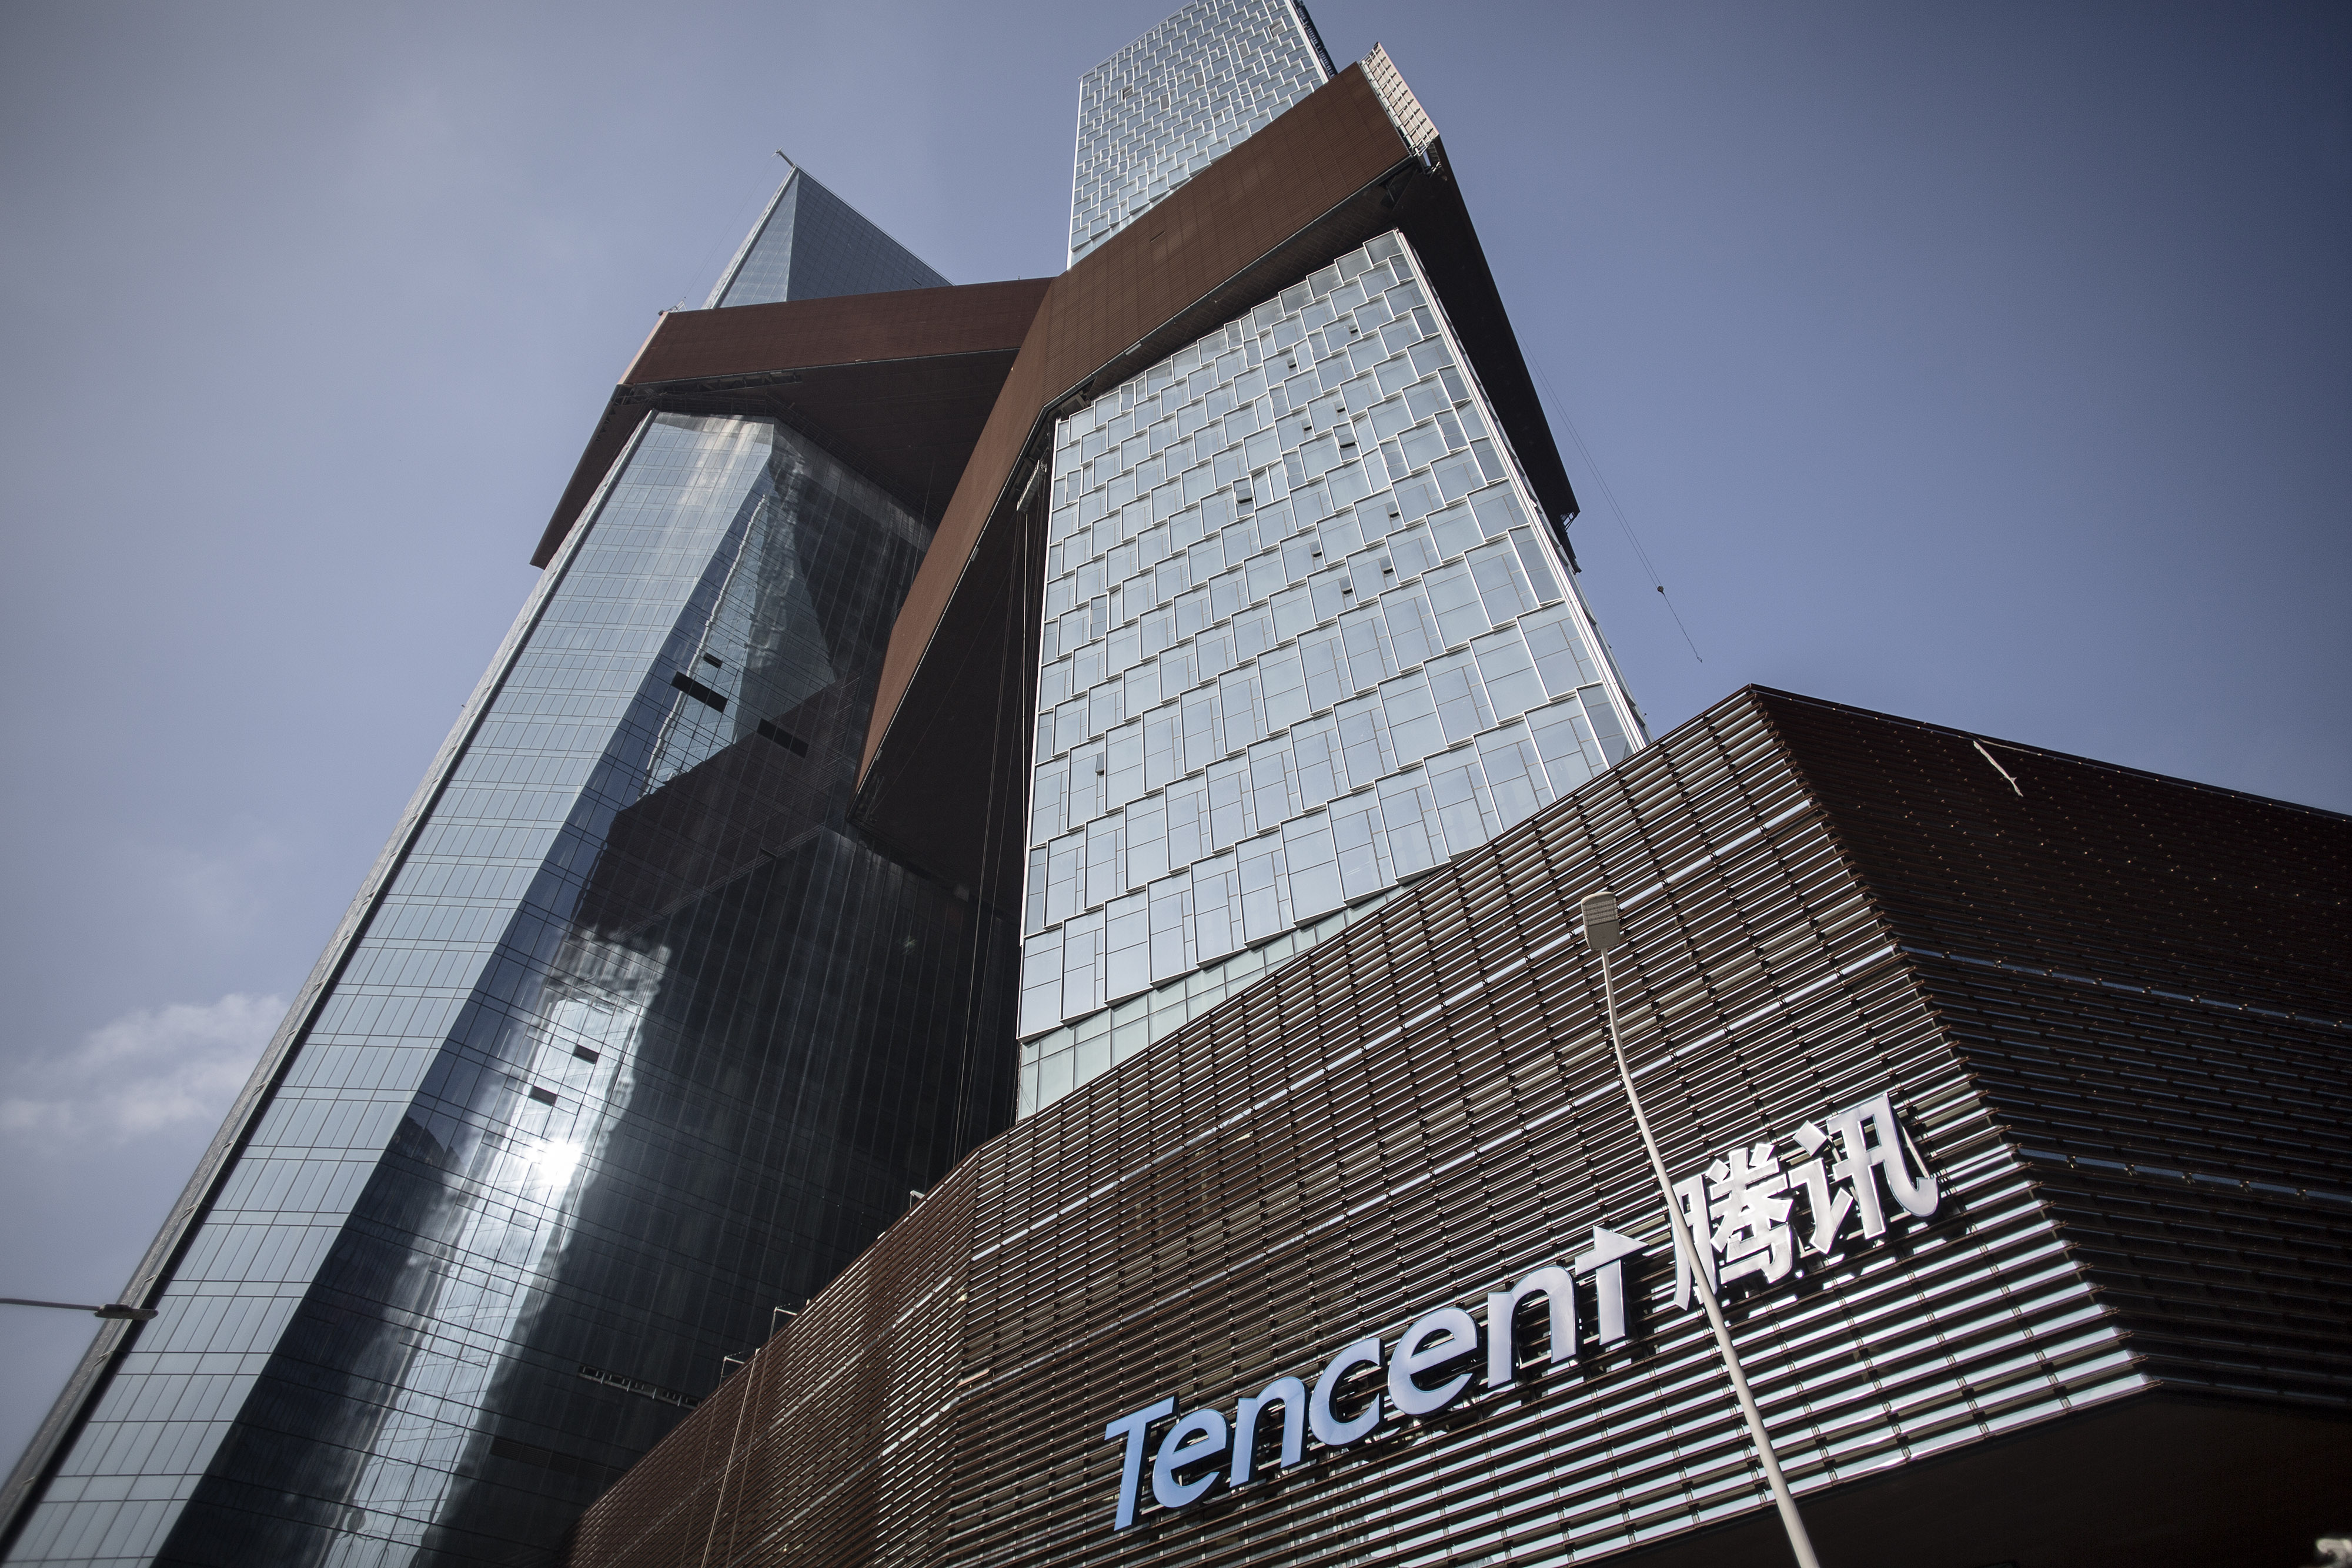 Tencent’s profit surges 69% thanks to its thriving games business